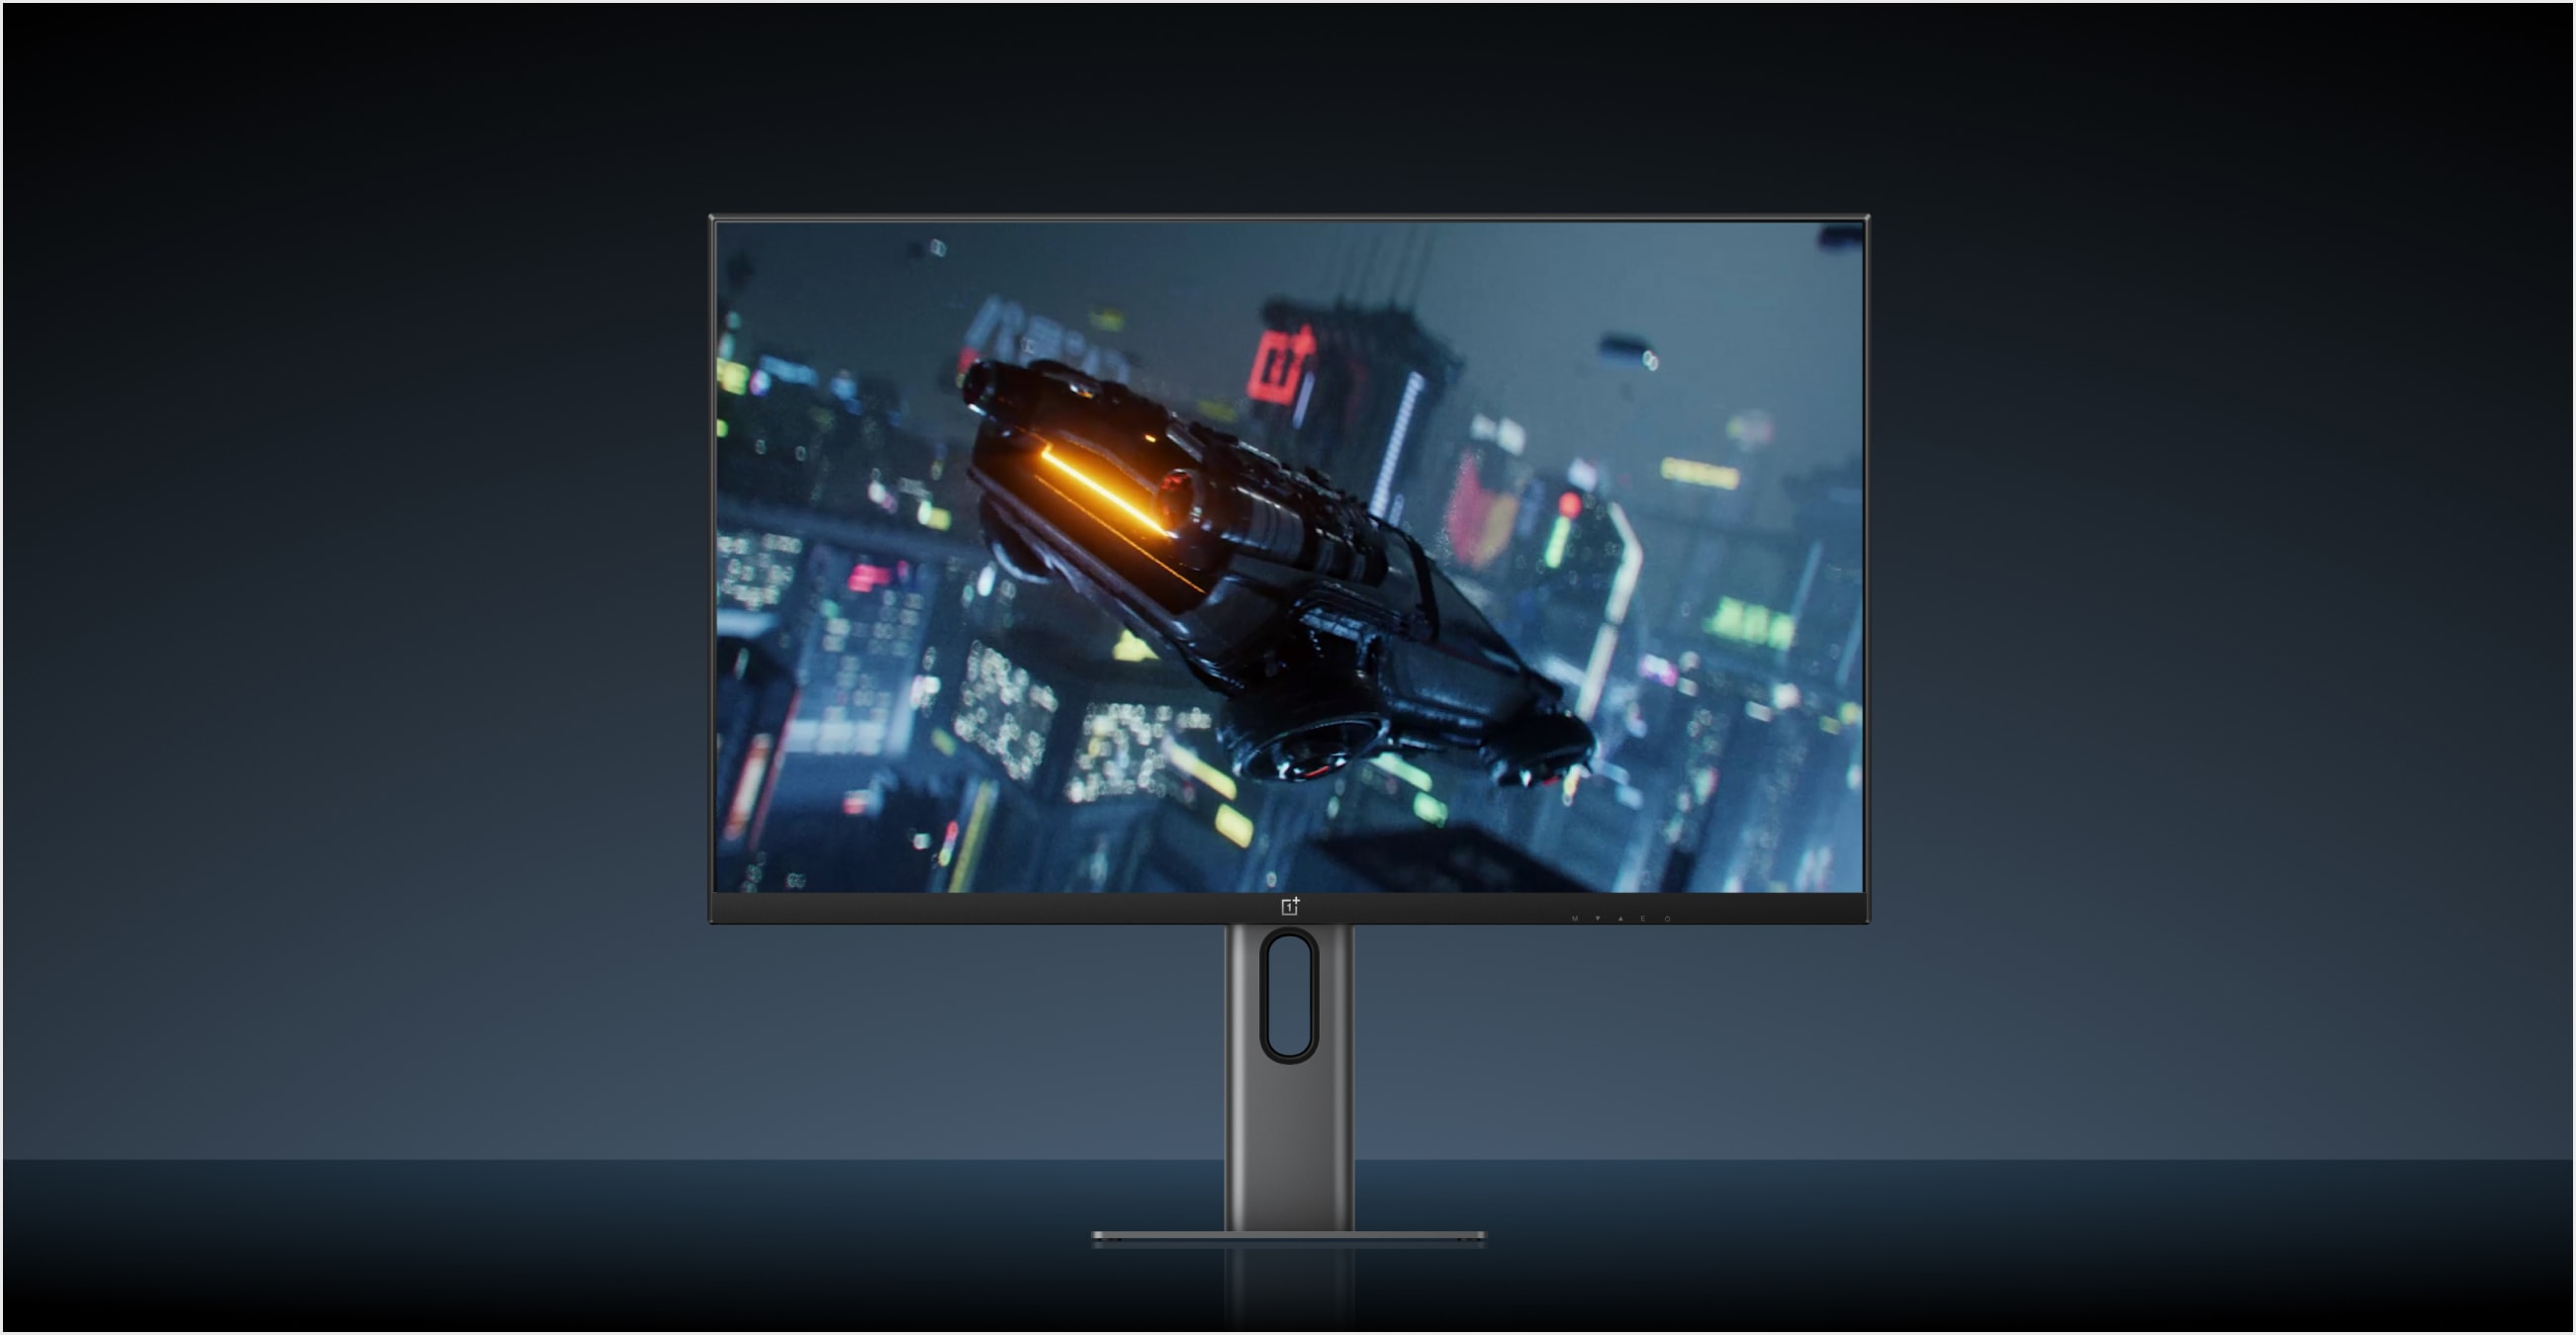 OnePlus unveiled Monitor X with a 27-inch 2K HDR screen at 165 Hz and support for AMD Freesync Premium technology